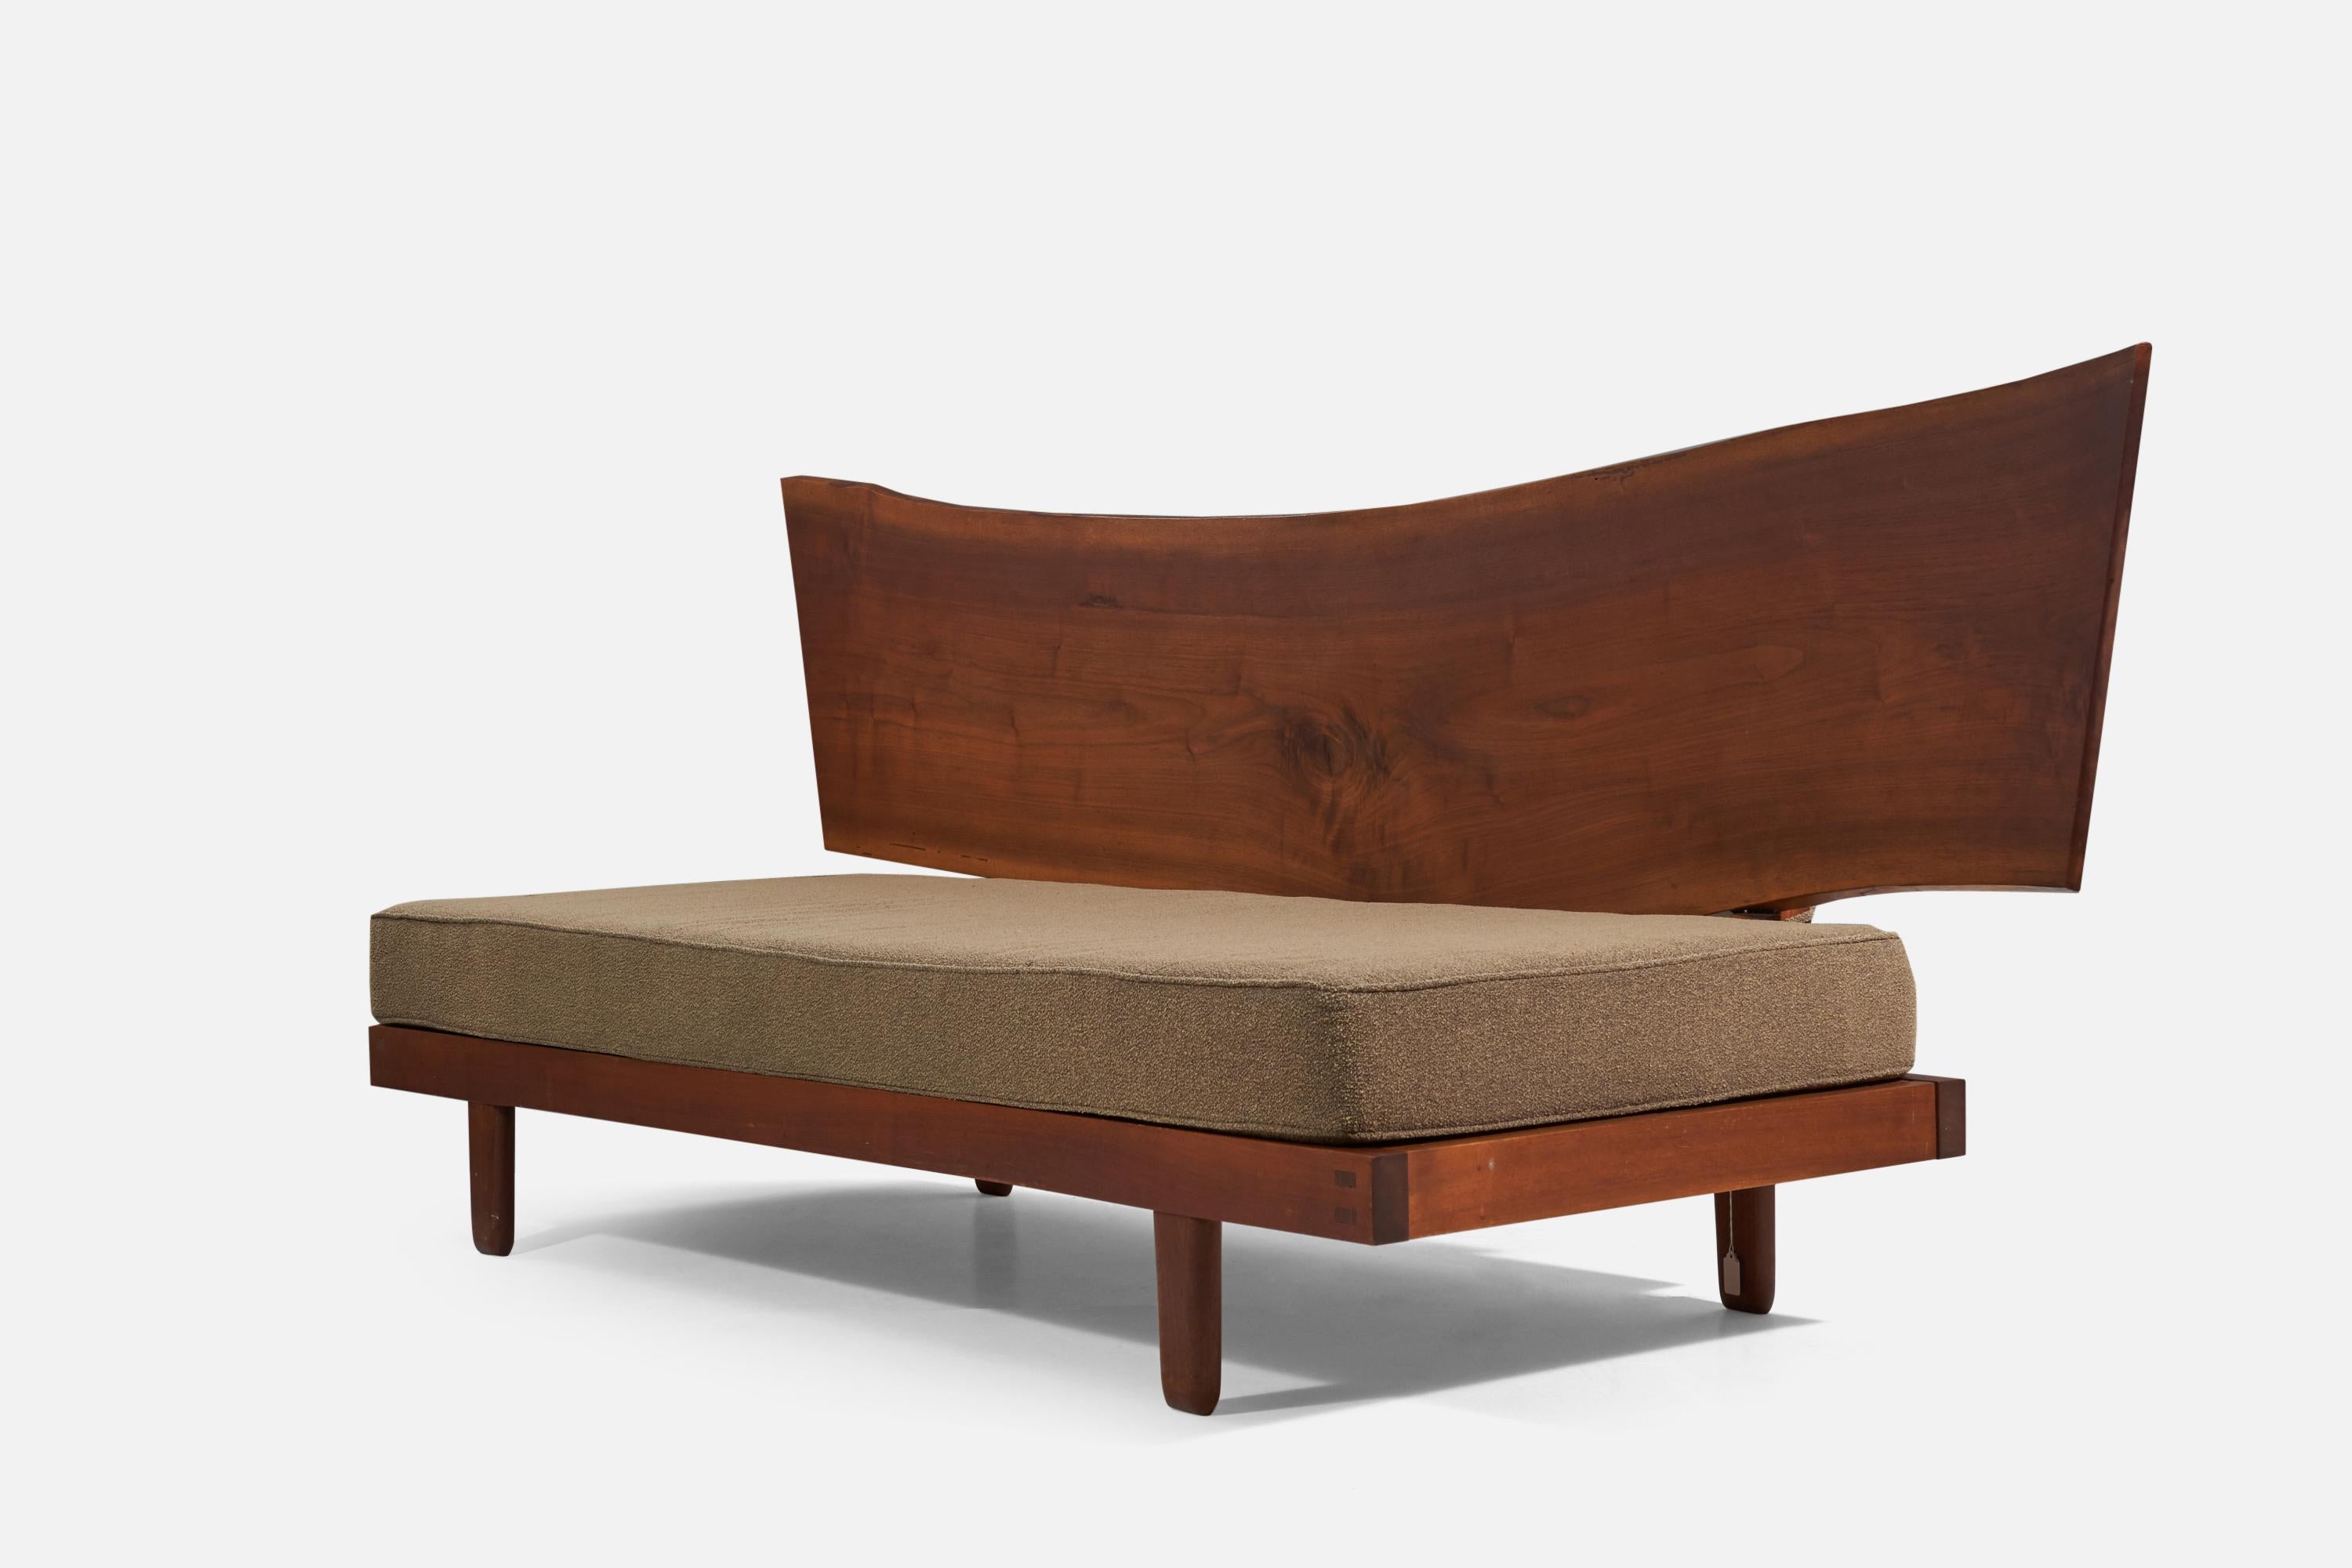 A walnut and fabric daybed designed and produced by George Nakashima, United States, 1969.

Acquired directly from the artist
Property from a Distinguished Private Pennsylvania Collection

This lot is sold with a digital copy of the original